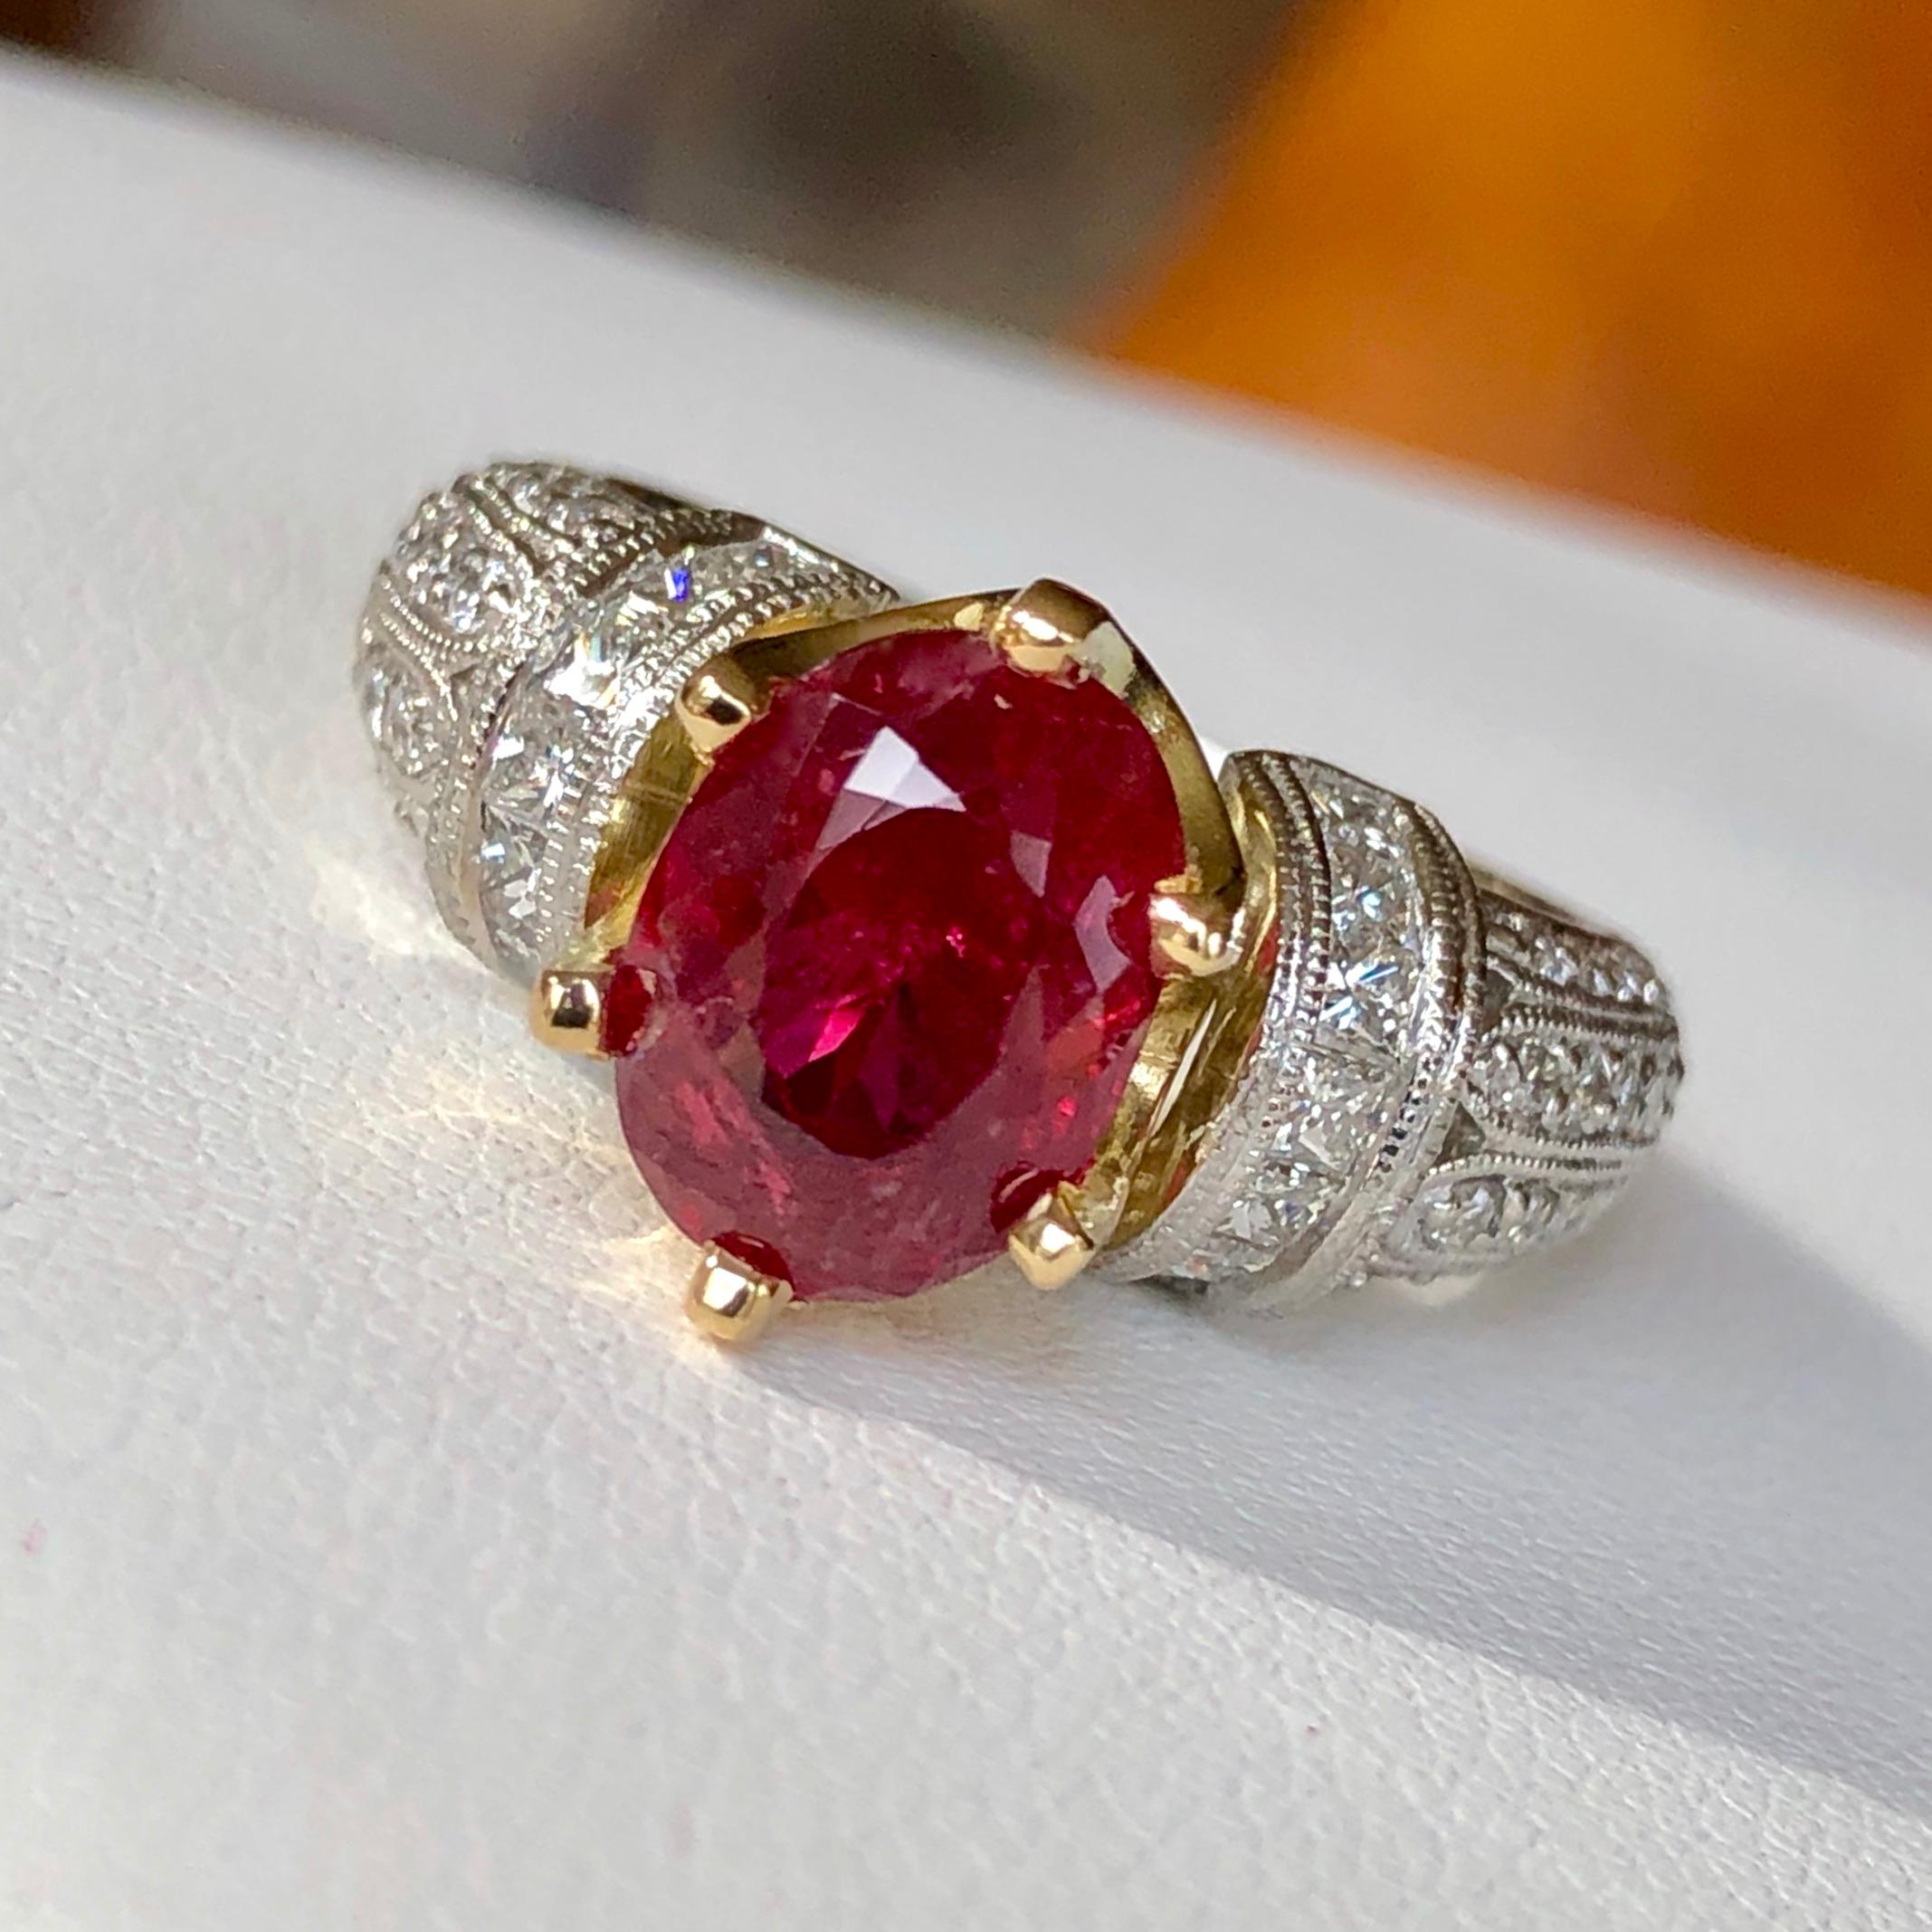 A stunning Estate 3.68 carat unheated ruby and diamond ring, mount crafted of platinum ( 